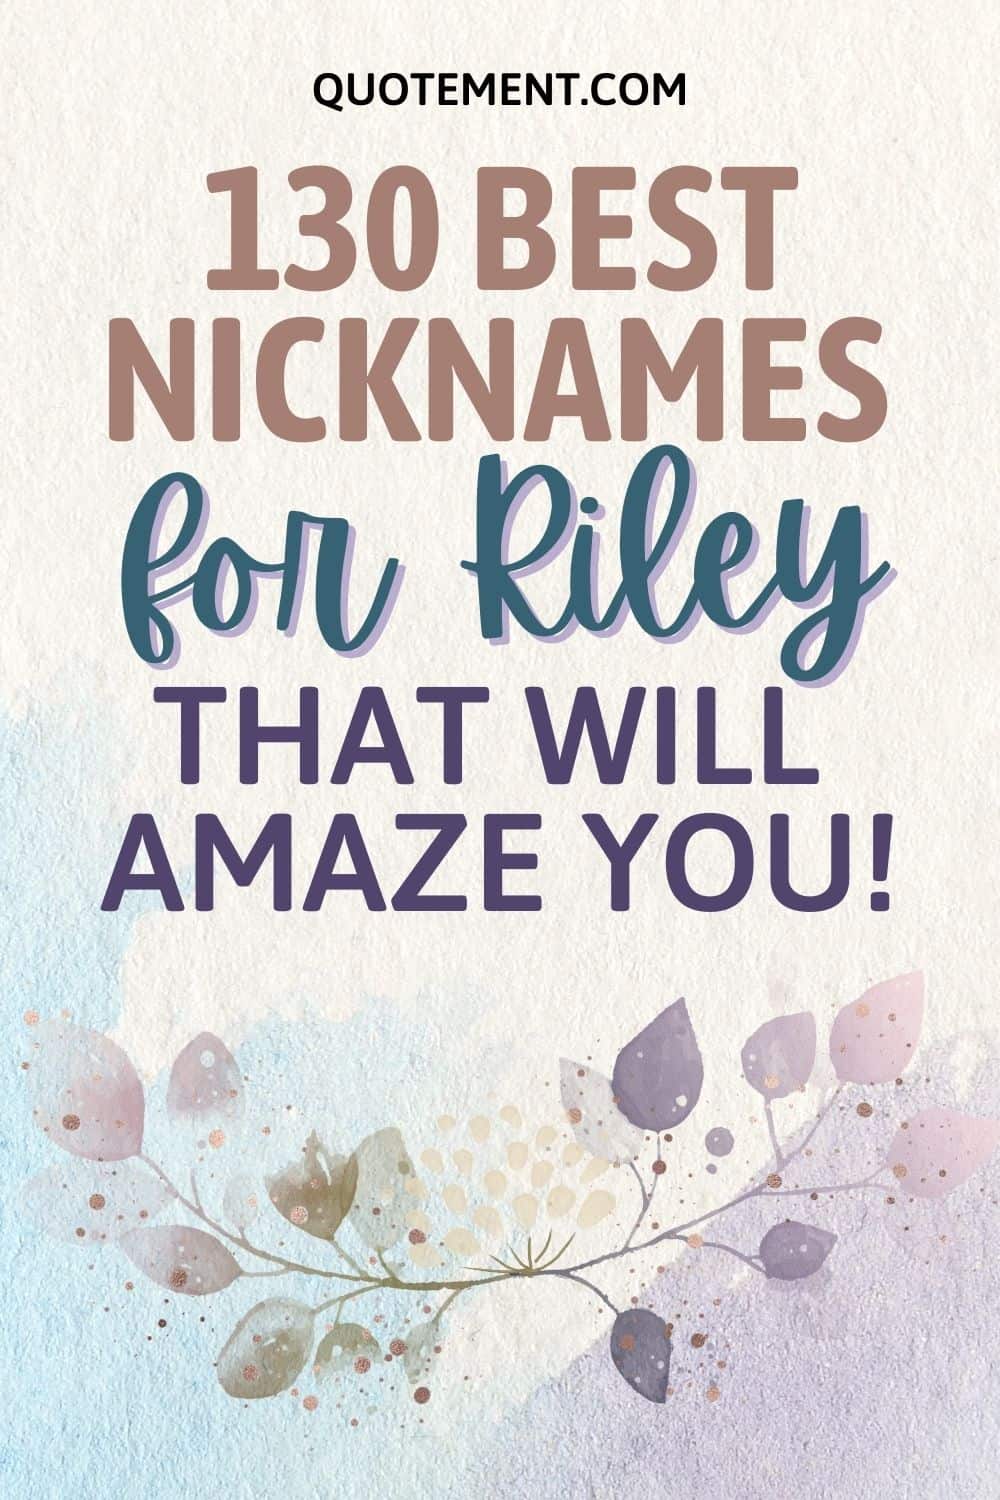 130 Ultimate Best Nicknames For Riley That Will Amaze You
